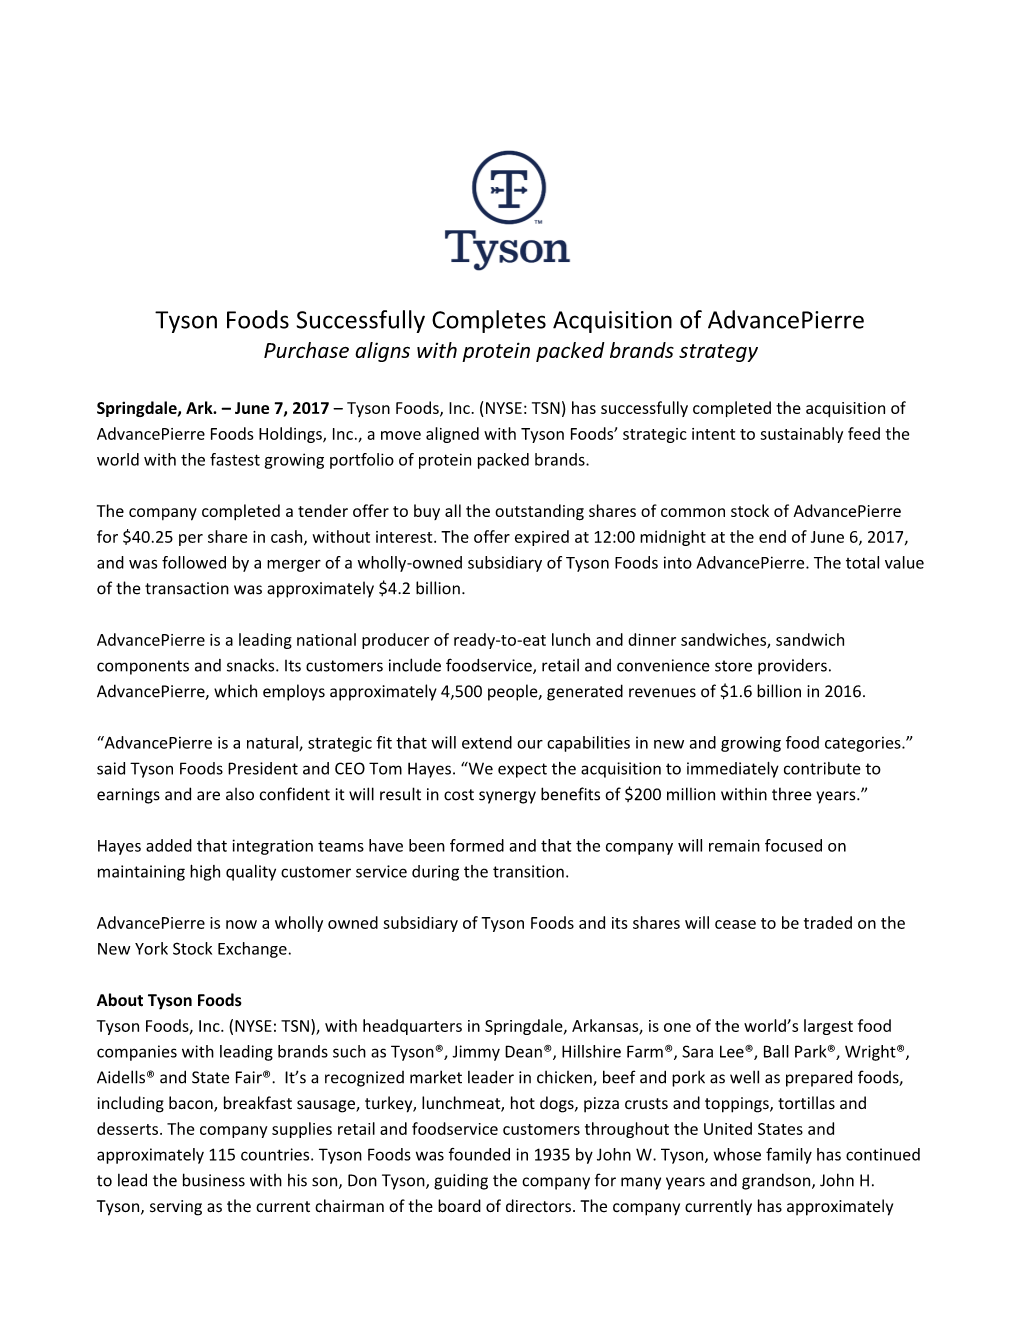 Tyson Foods Successfully Completes Acquisition of Advancepierre Purchase Aligns with Protein Packed Brands Strategy